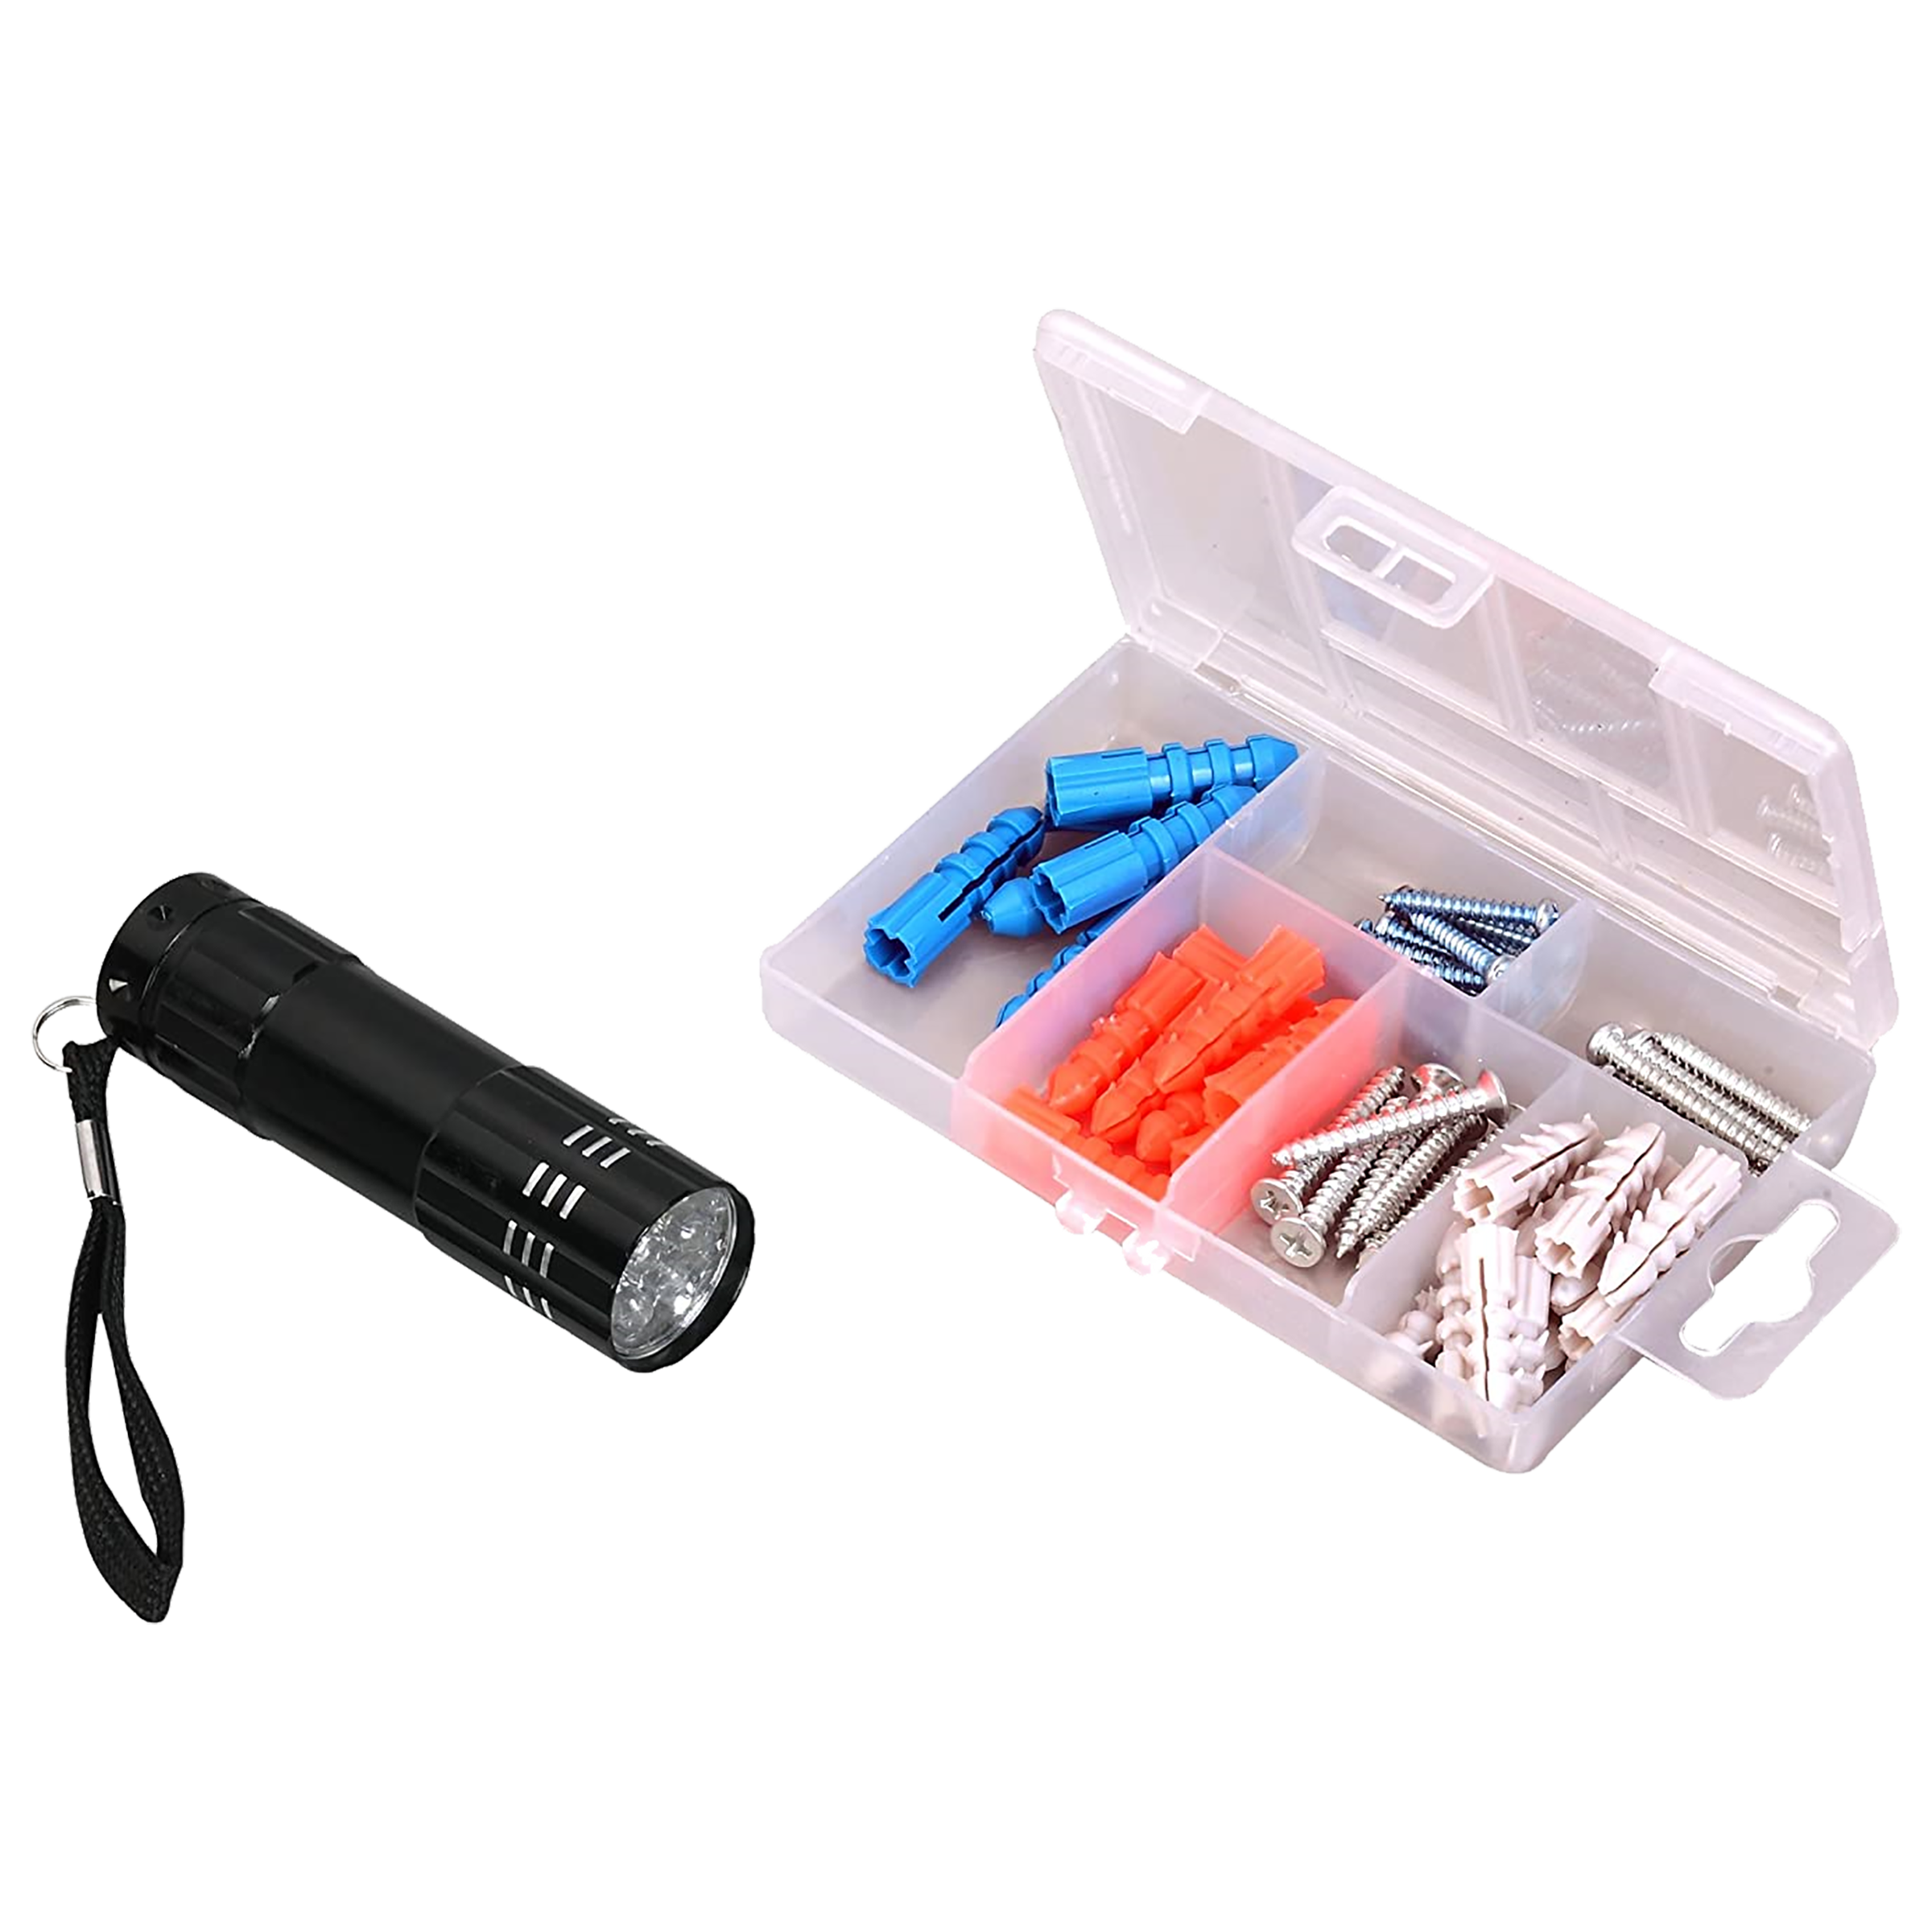 Buy Black & Decker BMT108C Hand Tool Kit (Tools Are Securely Housed,  Orange) Online - Croma